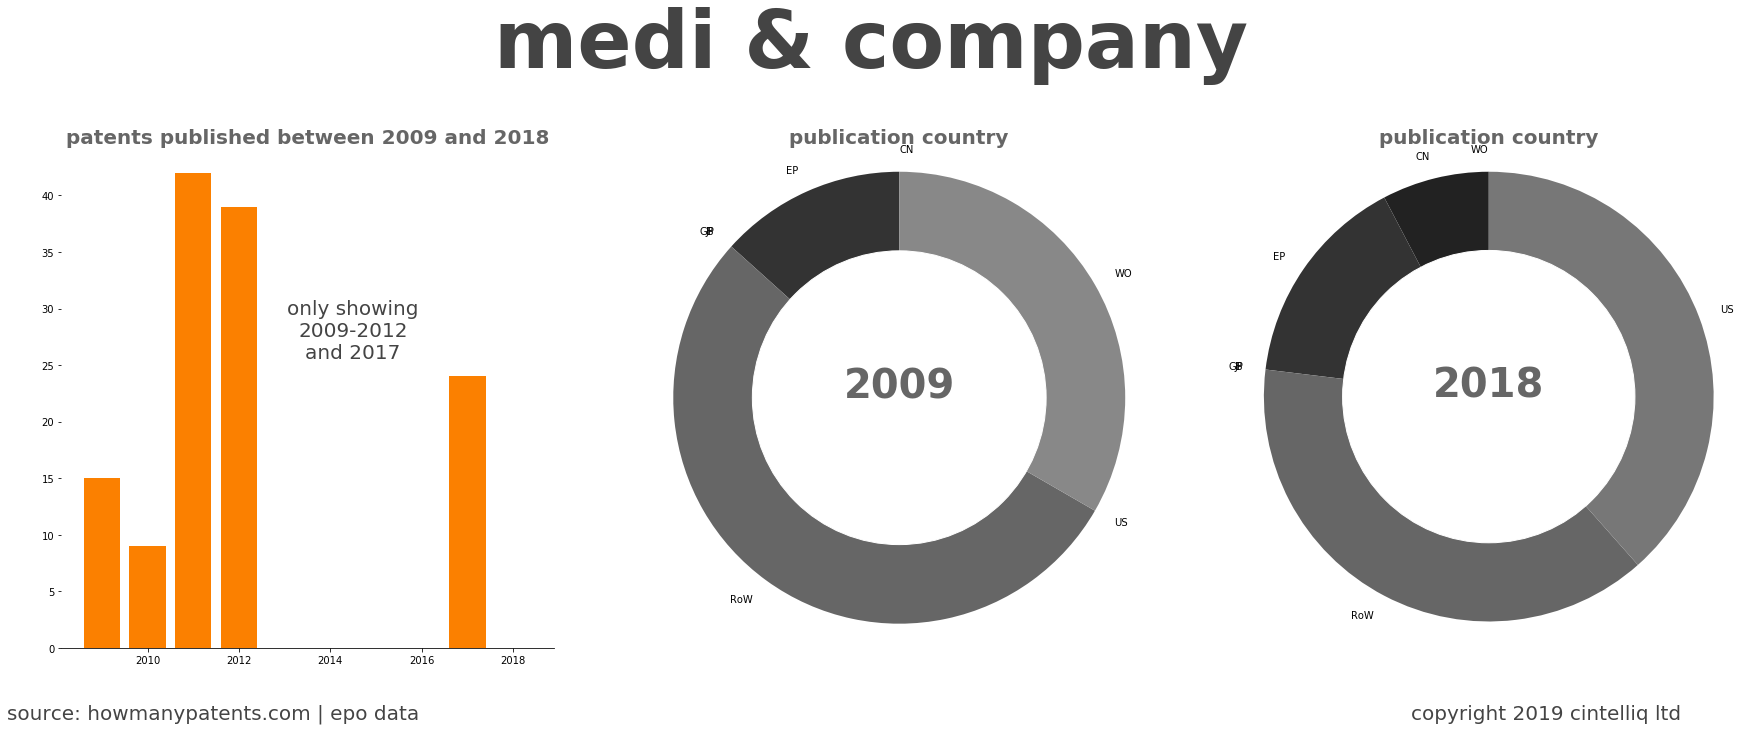 summary of patents for Medi & Company